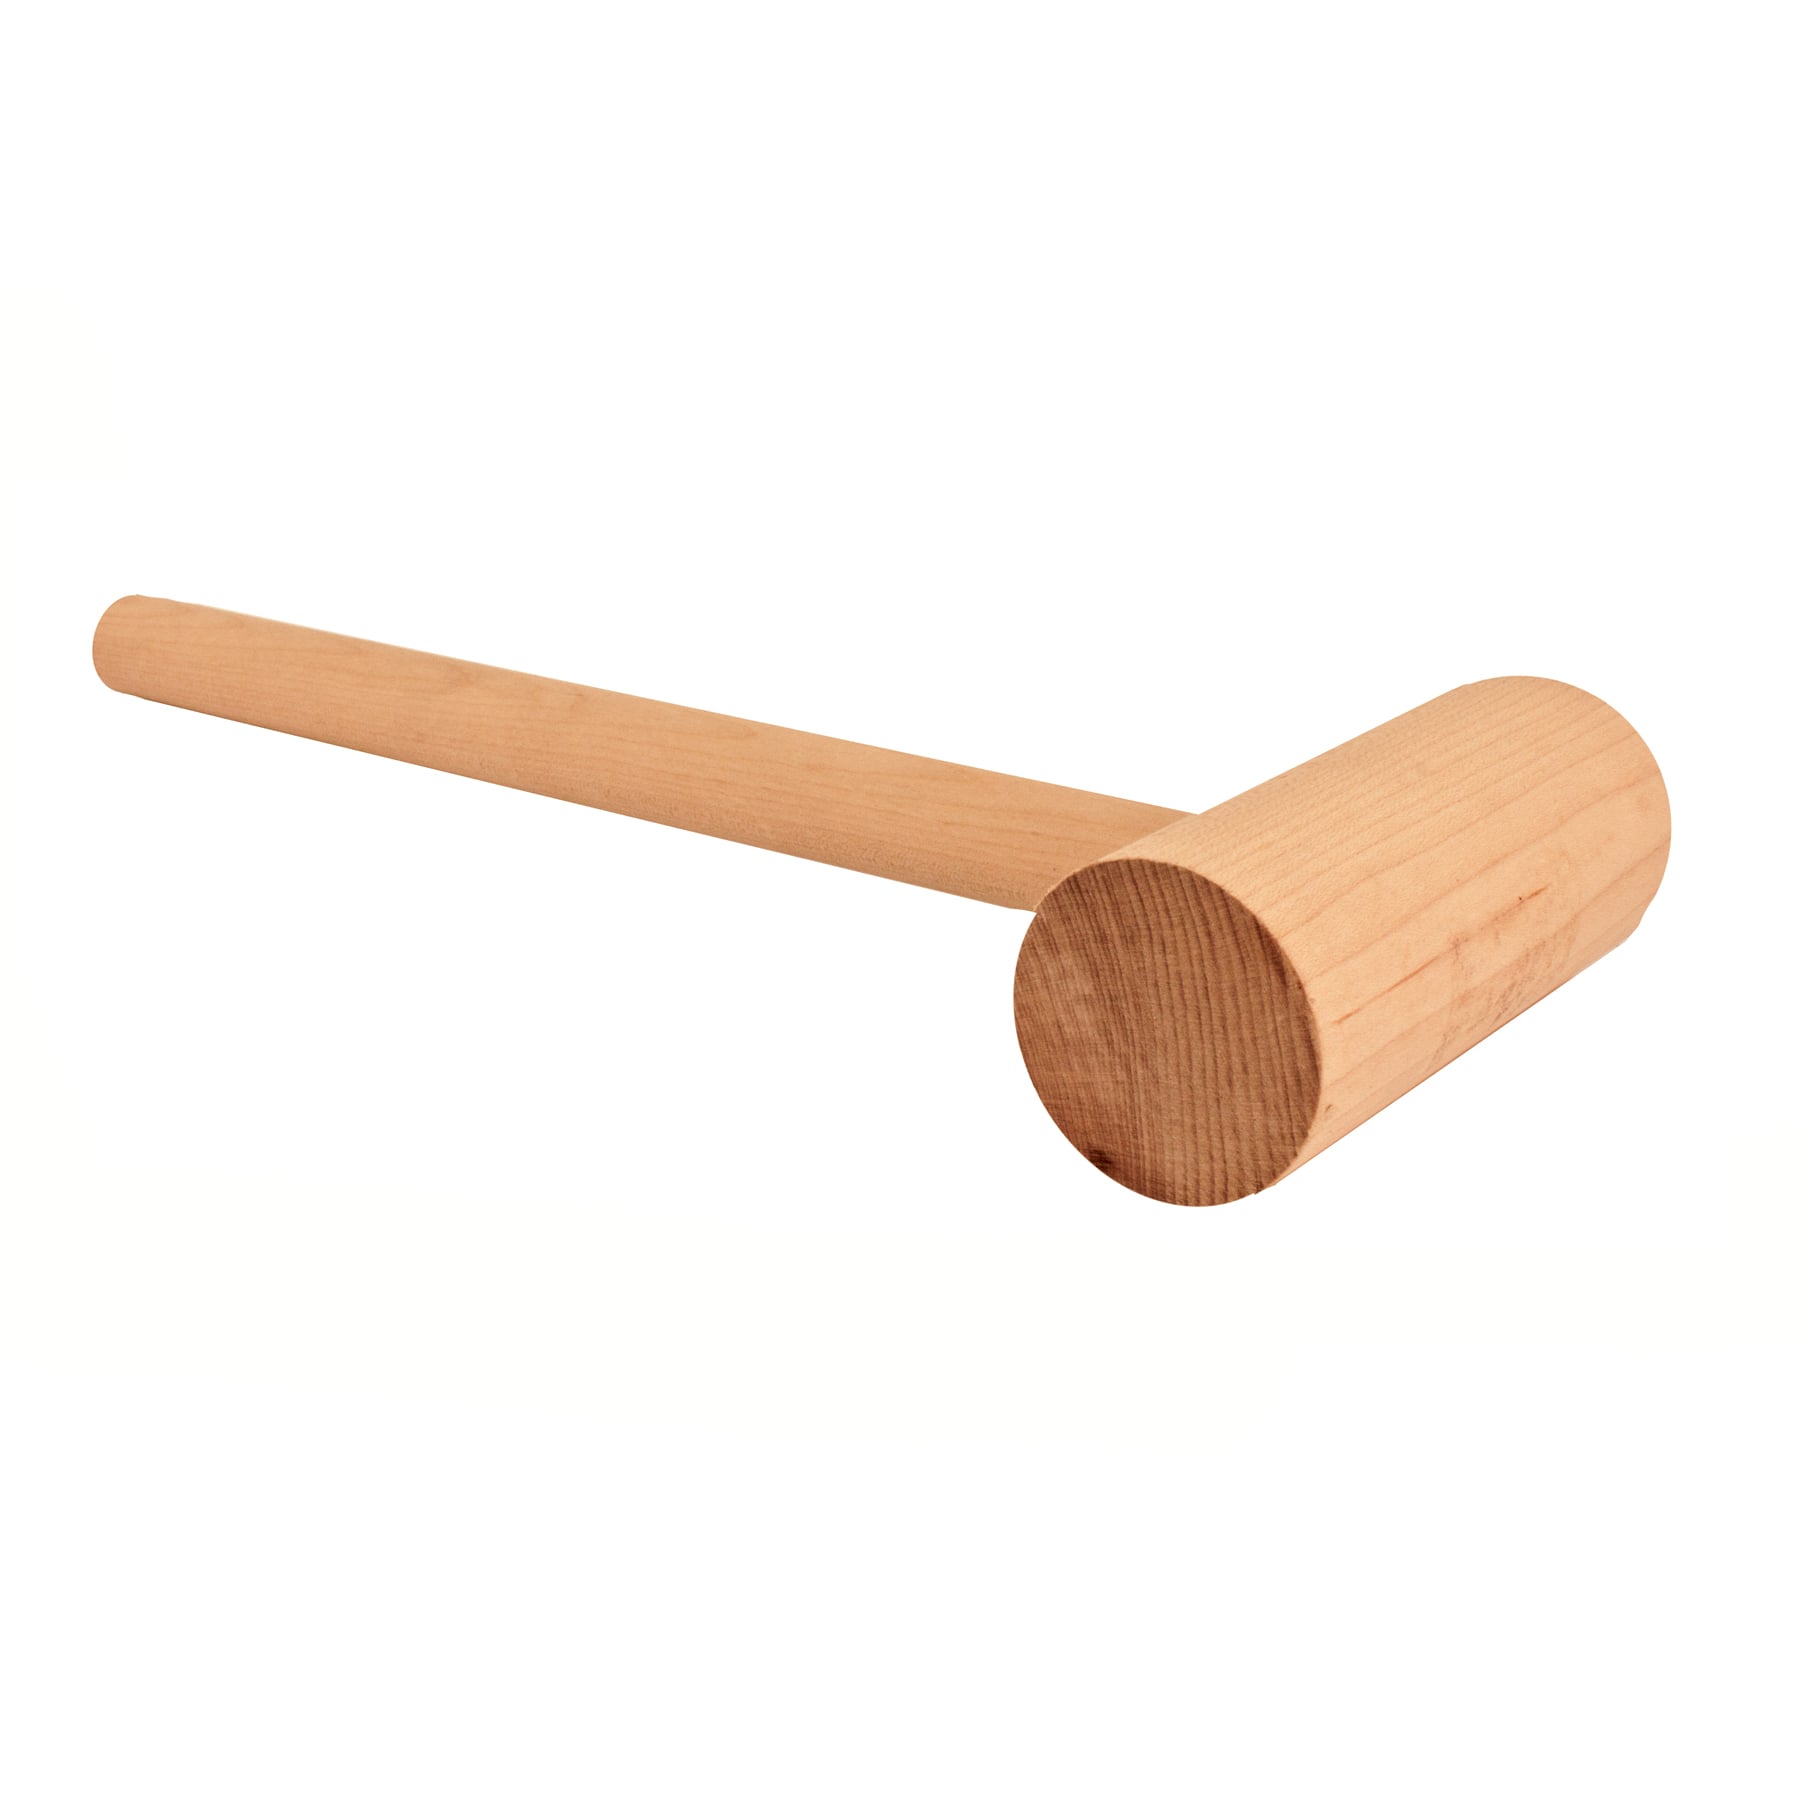 wooden mallet drawing